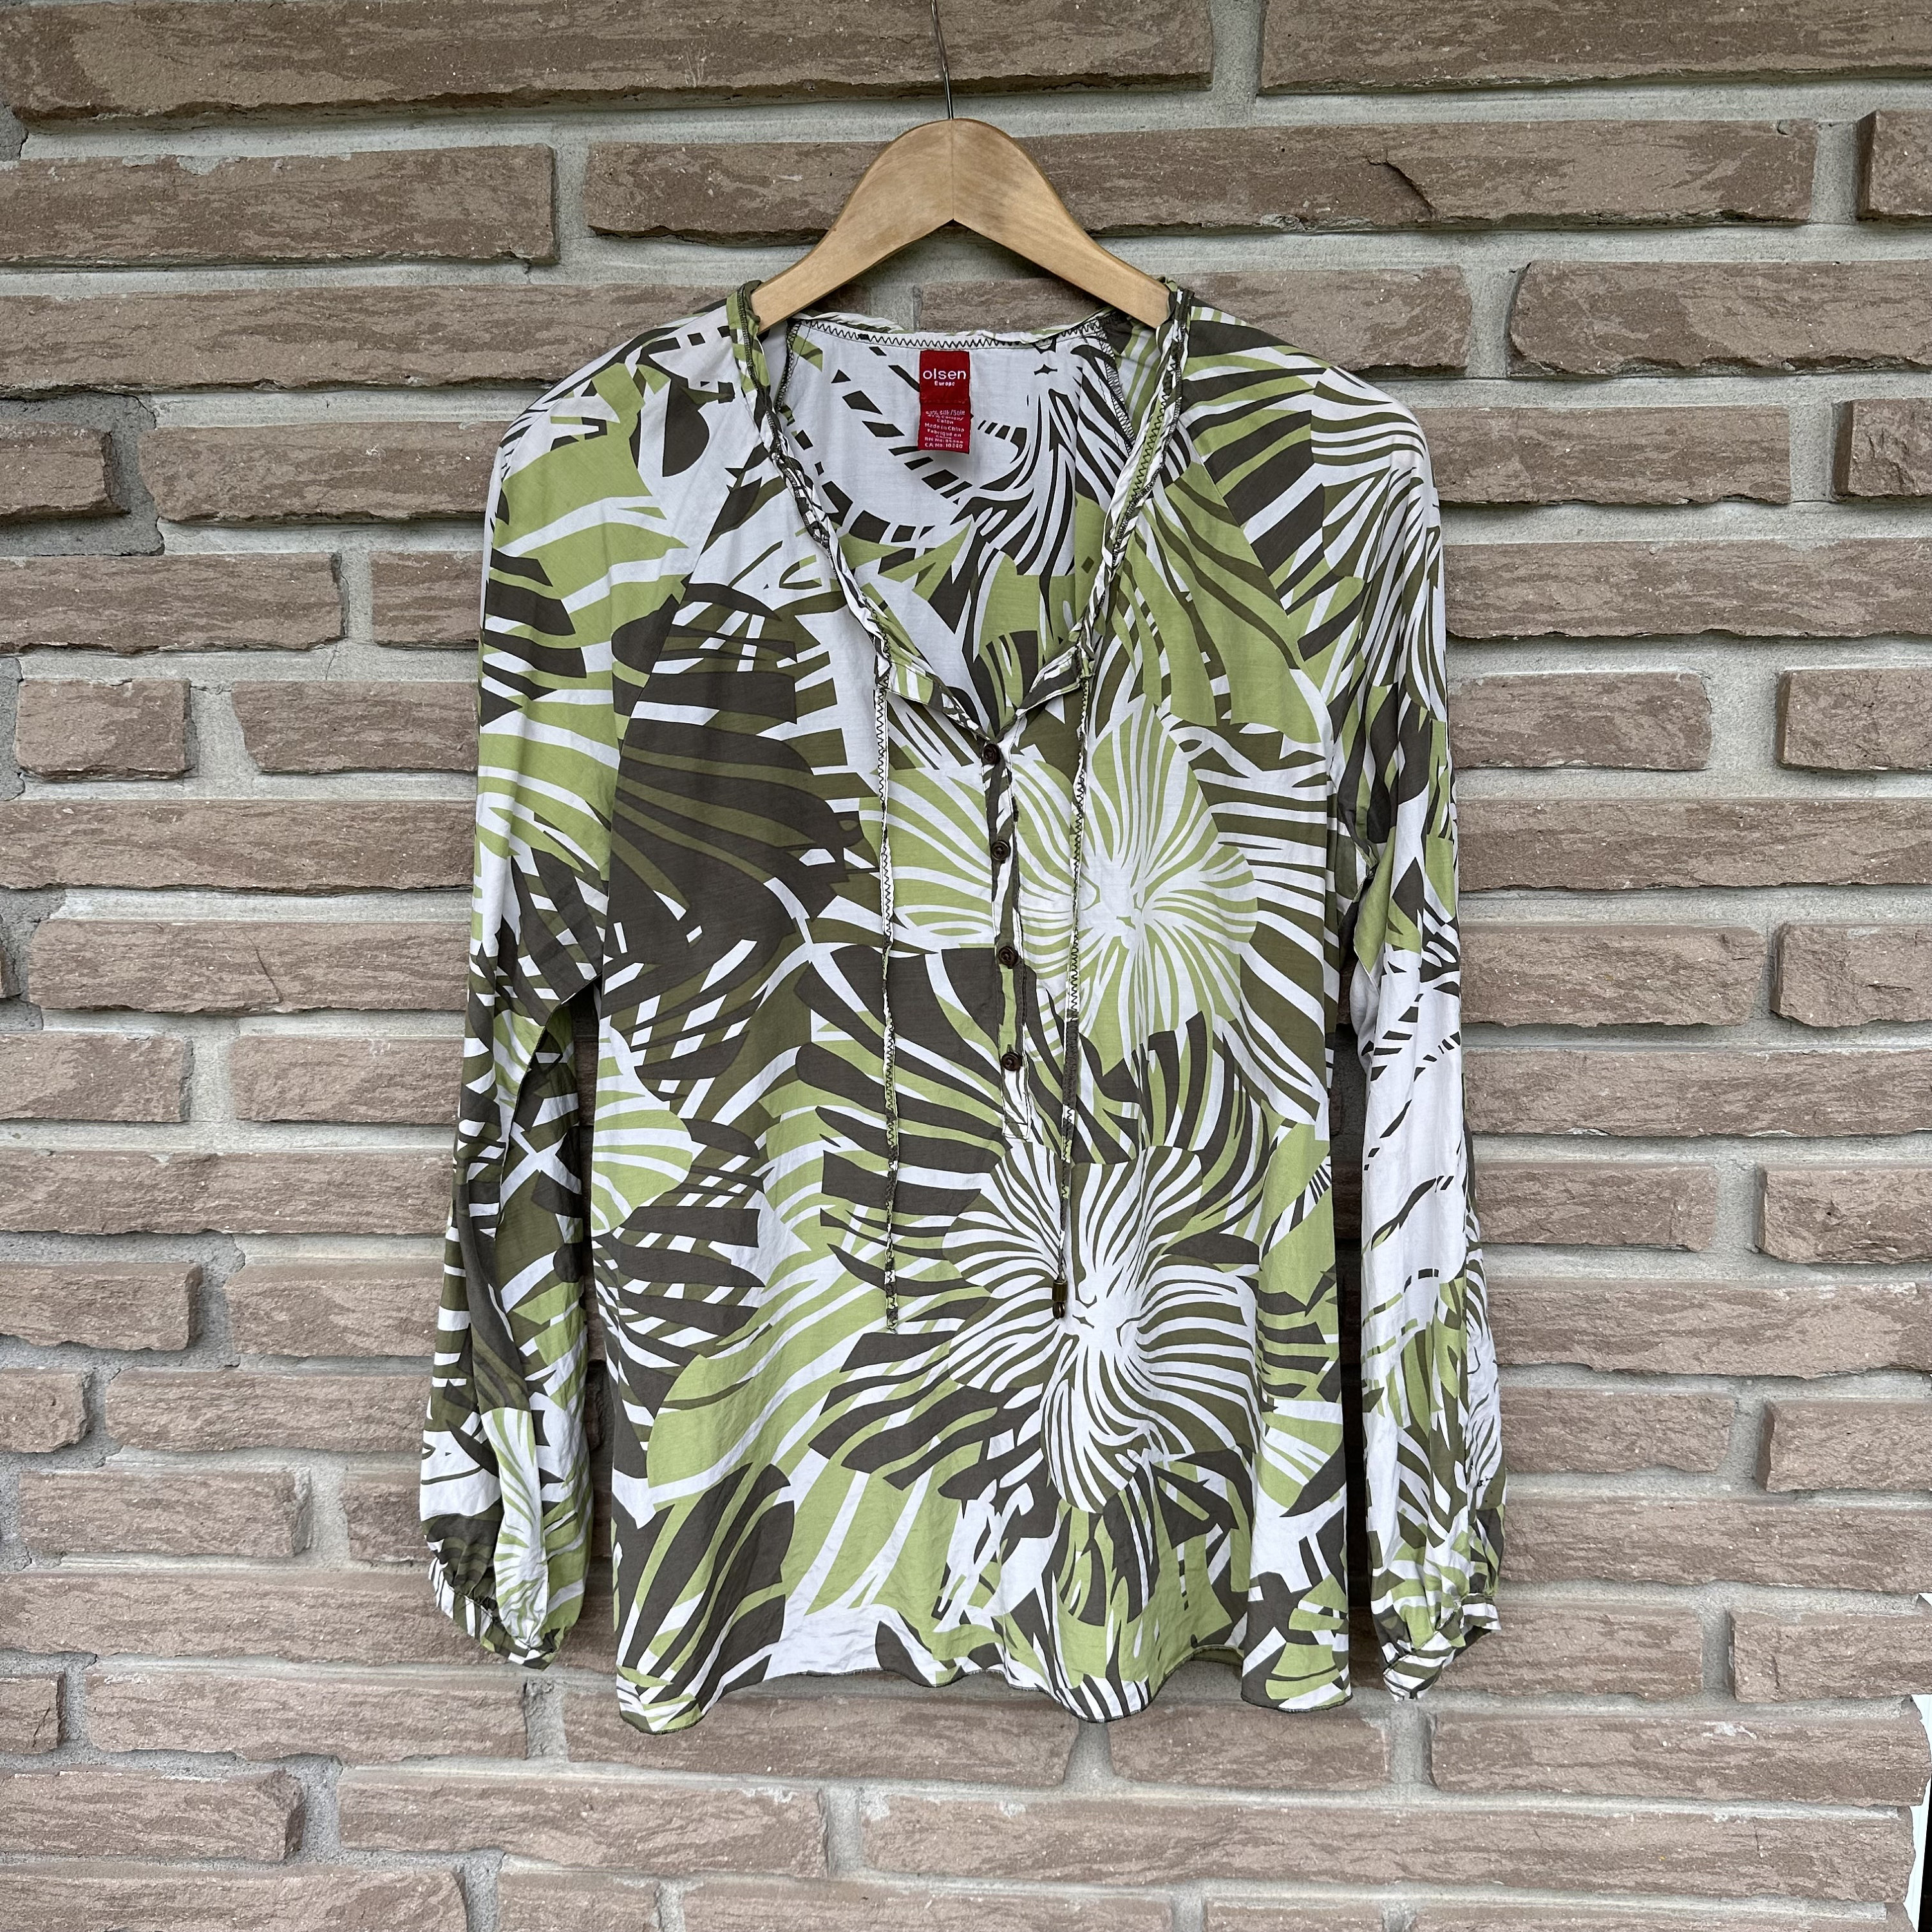 Olsen Europe Green Palm Leaf Top, Cotton & Silk Abstract Floral Blouse,  Half Button, Casual Lightweight Straight Fit, Resort Cruise Wear -   Canada